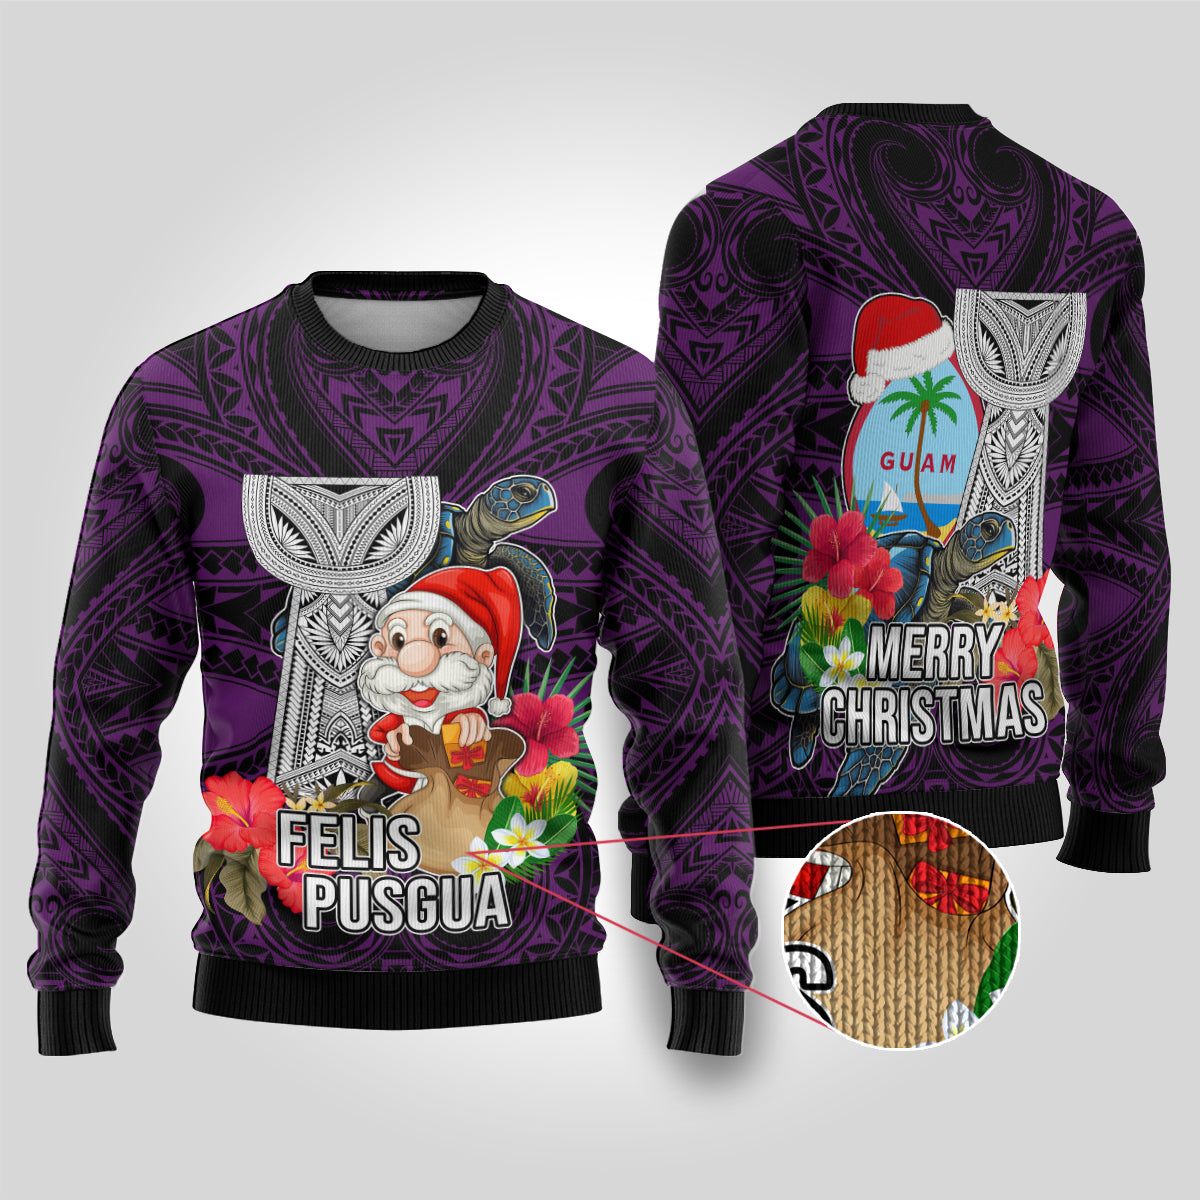 Guam Christmas Ugly Christmas Sweater Santa Gift Latte Stone and Sea Turle Mix Hibiscus Chamorro Pink Style LT03